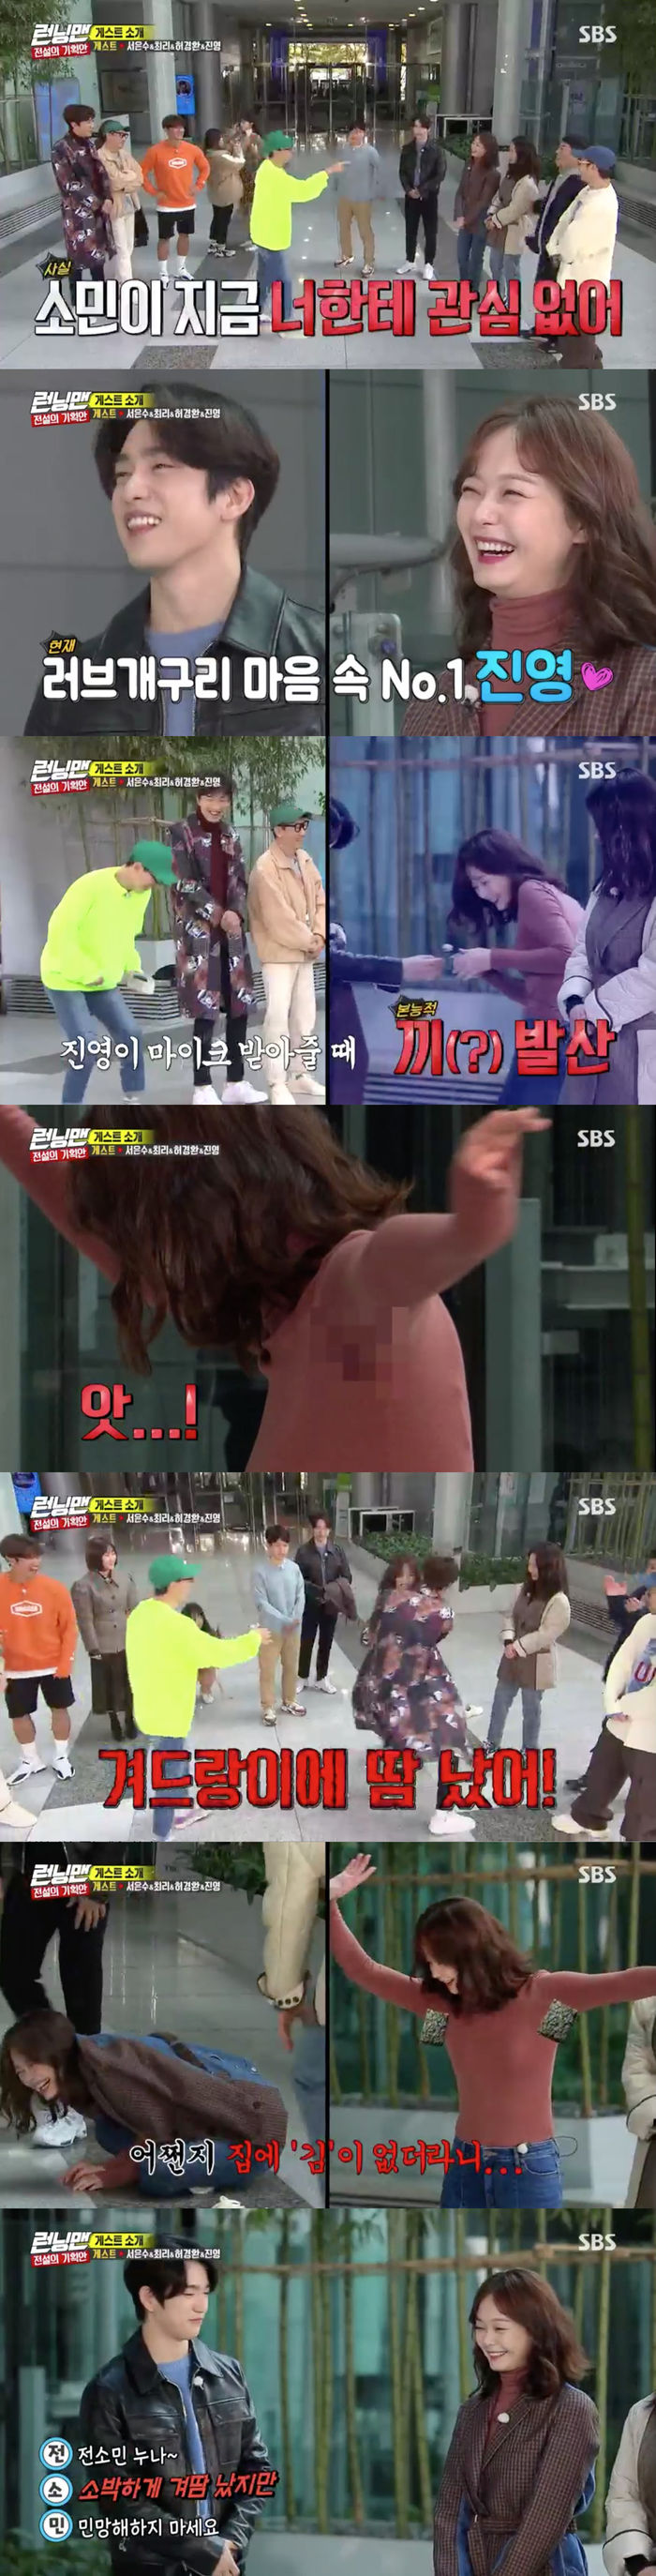 Jeon So-mins self-interest in the emergence of Jinyoung has ExplosionOn SBS Running Man broadcasted on the 17th, Legendary Plan Race was held.On the day of the show, actors Seo Eun-soo and Choi appeared as guests, attracting attention. In particular, Running Man members were glad to see the appearance of Seo Eun-soo.On the other hand, Jeon So-min and Song Ji-hyo showed regret in the appearance of female guest, and the production team said, Today is also two more minutes for male guest.The guest that appeared was Huh Kyung-hwan and Jinyoung of GOT7.Jeon So-min, who had a GOT7 Jinyoung illness, was embarrassed by his appearance and hid behind Song Ji-hyo.Especially, to Song Ji-hyo, Jinyoung was sick because he was so handsome and received the members pins.Jeon So-min, who was self-explosion after seeing Jinyoung, was thrilled when Yang Se-chan took care of Choi.He said, Hey, have you ever helped me when I did something once?Yoo Jae-Suk said, In fact, Somin is not interested in you now, and Yang Se-chan said, Jinyoung is trying to cause jealousy.Jeon So-min then attracted attention by saying, I learned Korean dance, I learned it at the welfare center.So, Jeon So-min also performed Korean dance.At this time, Jeon So-mins sweat was captured and the scene was devastated. Lee Kwang-soo said, No, there were two pieces of Kim.Kim is not a small Kim, but Kimbap Kim. However, Jinyoung encouraged Jeon So-min to encourage him, saying, Jeon So-min sister, I sweated so smoothly but do not be embarrassed.